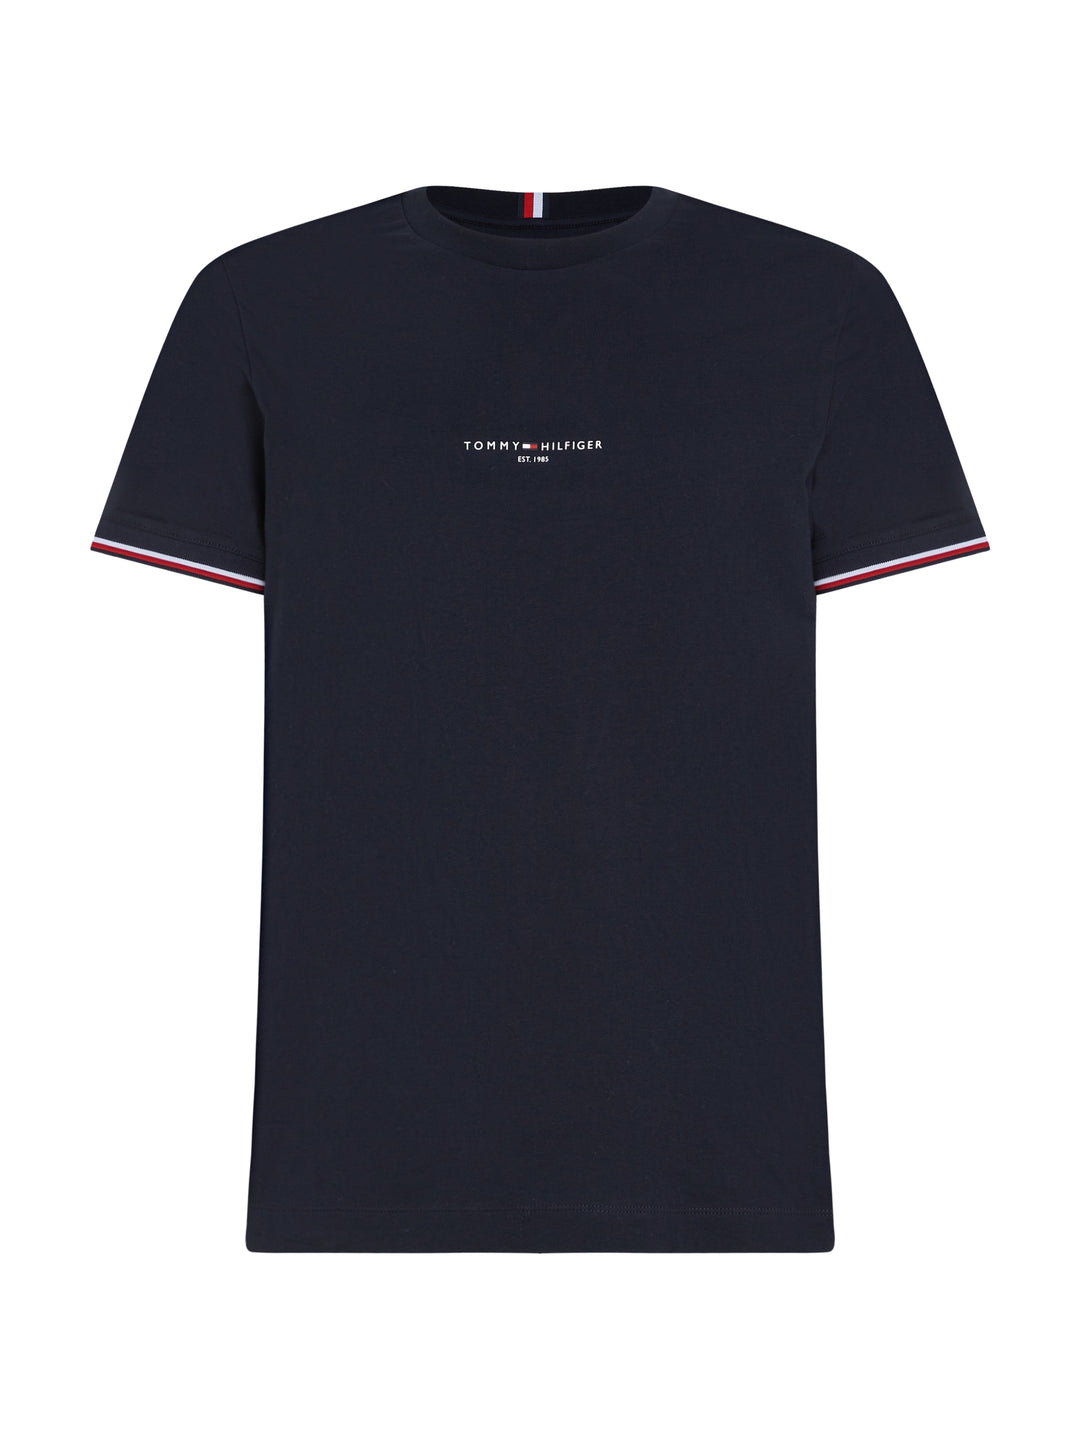 TH TOMMY LOGO TIPPED TEE - NAVY